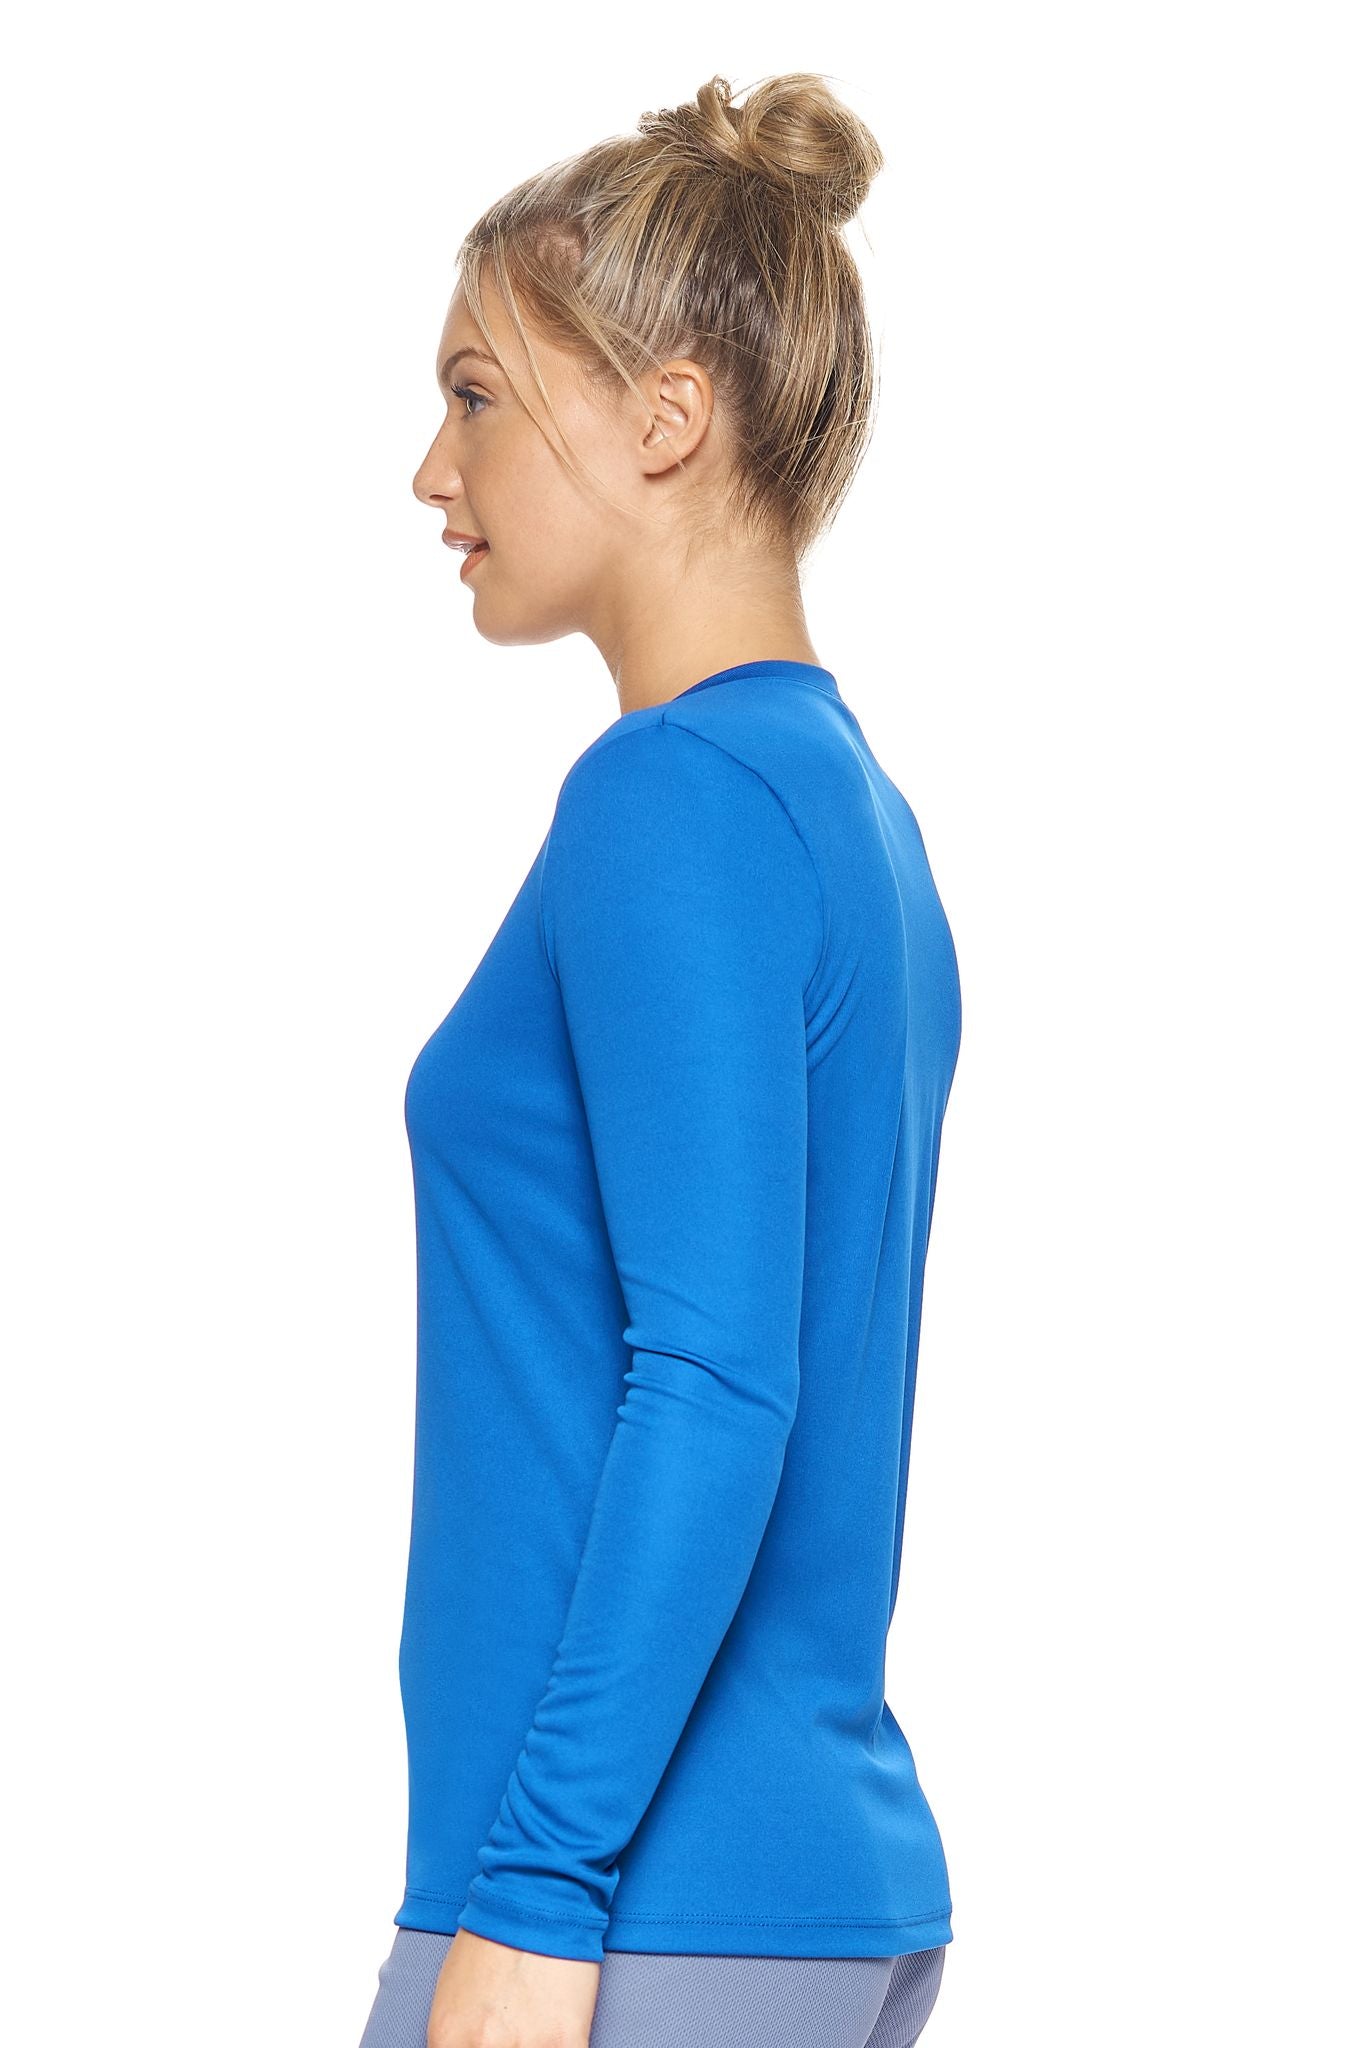 Expert Brand Retail Womens Activewear Womens Sportswear Made in USA Long Sleeve Tec Tee Runners Tee V Neck royal blue 2#color_royal-blue